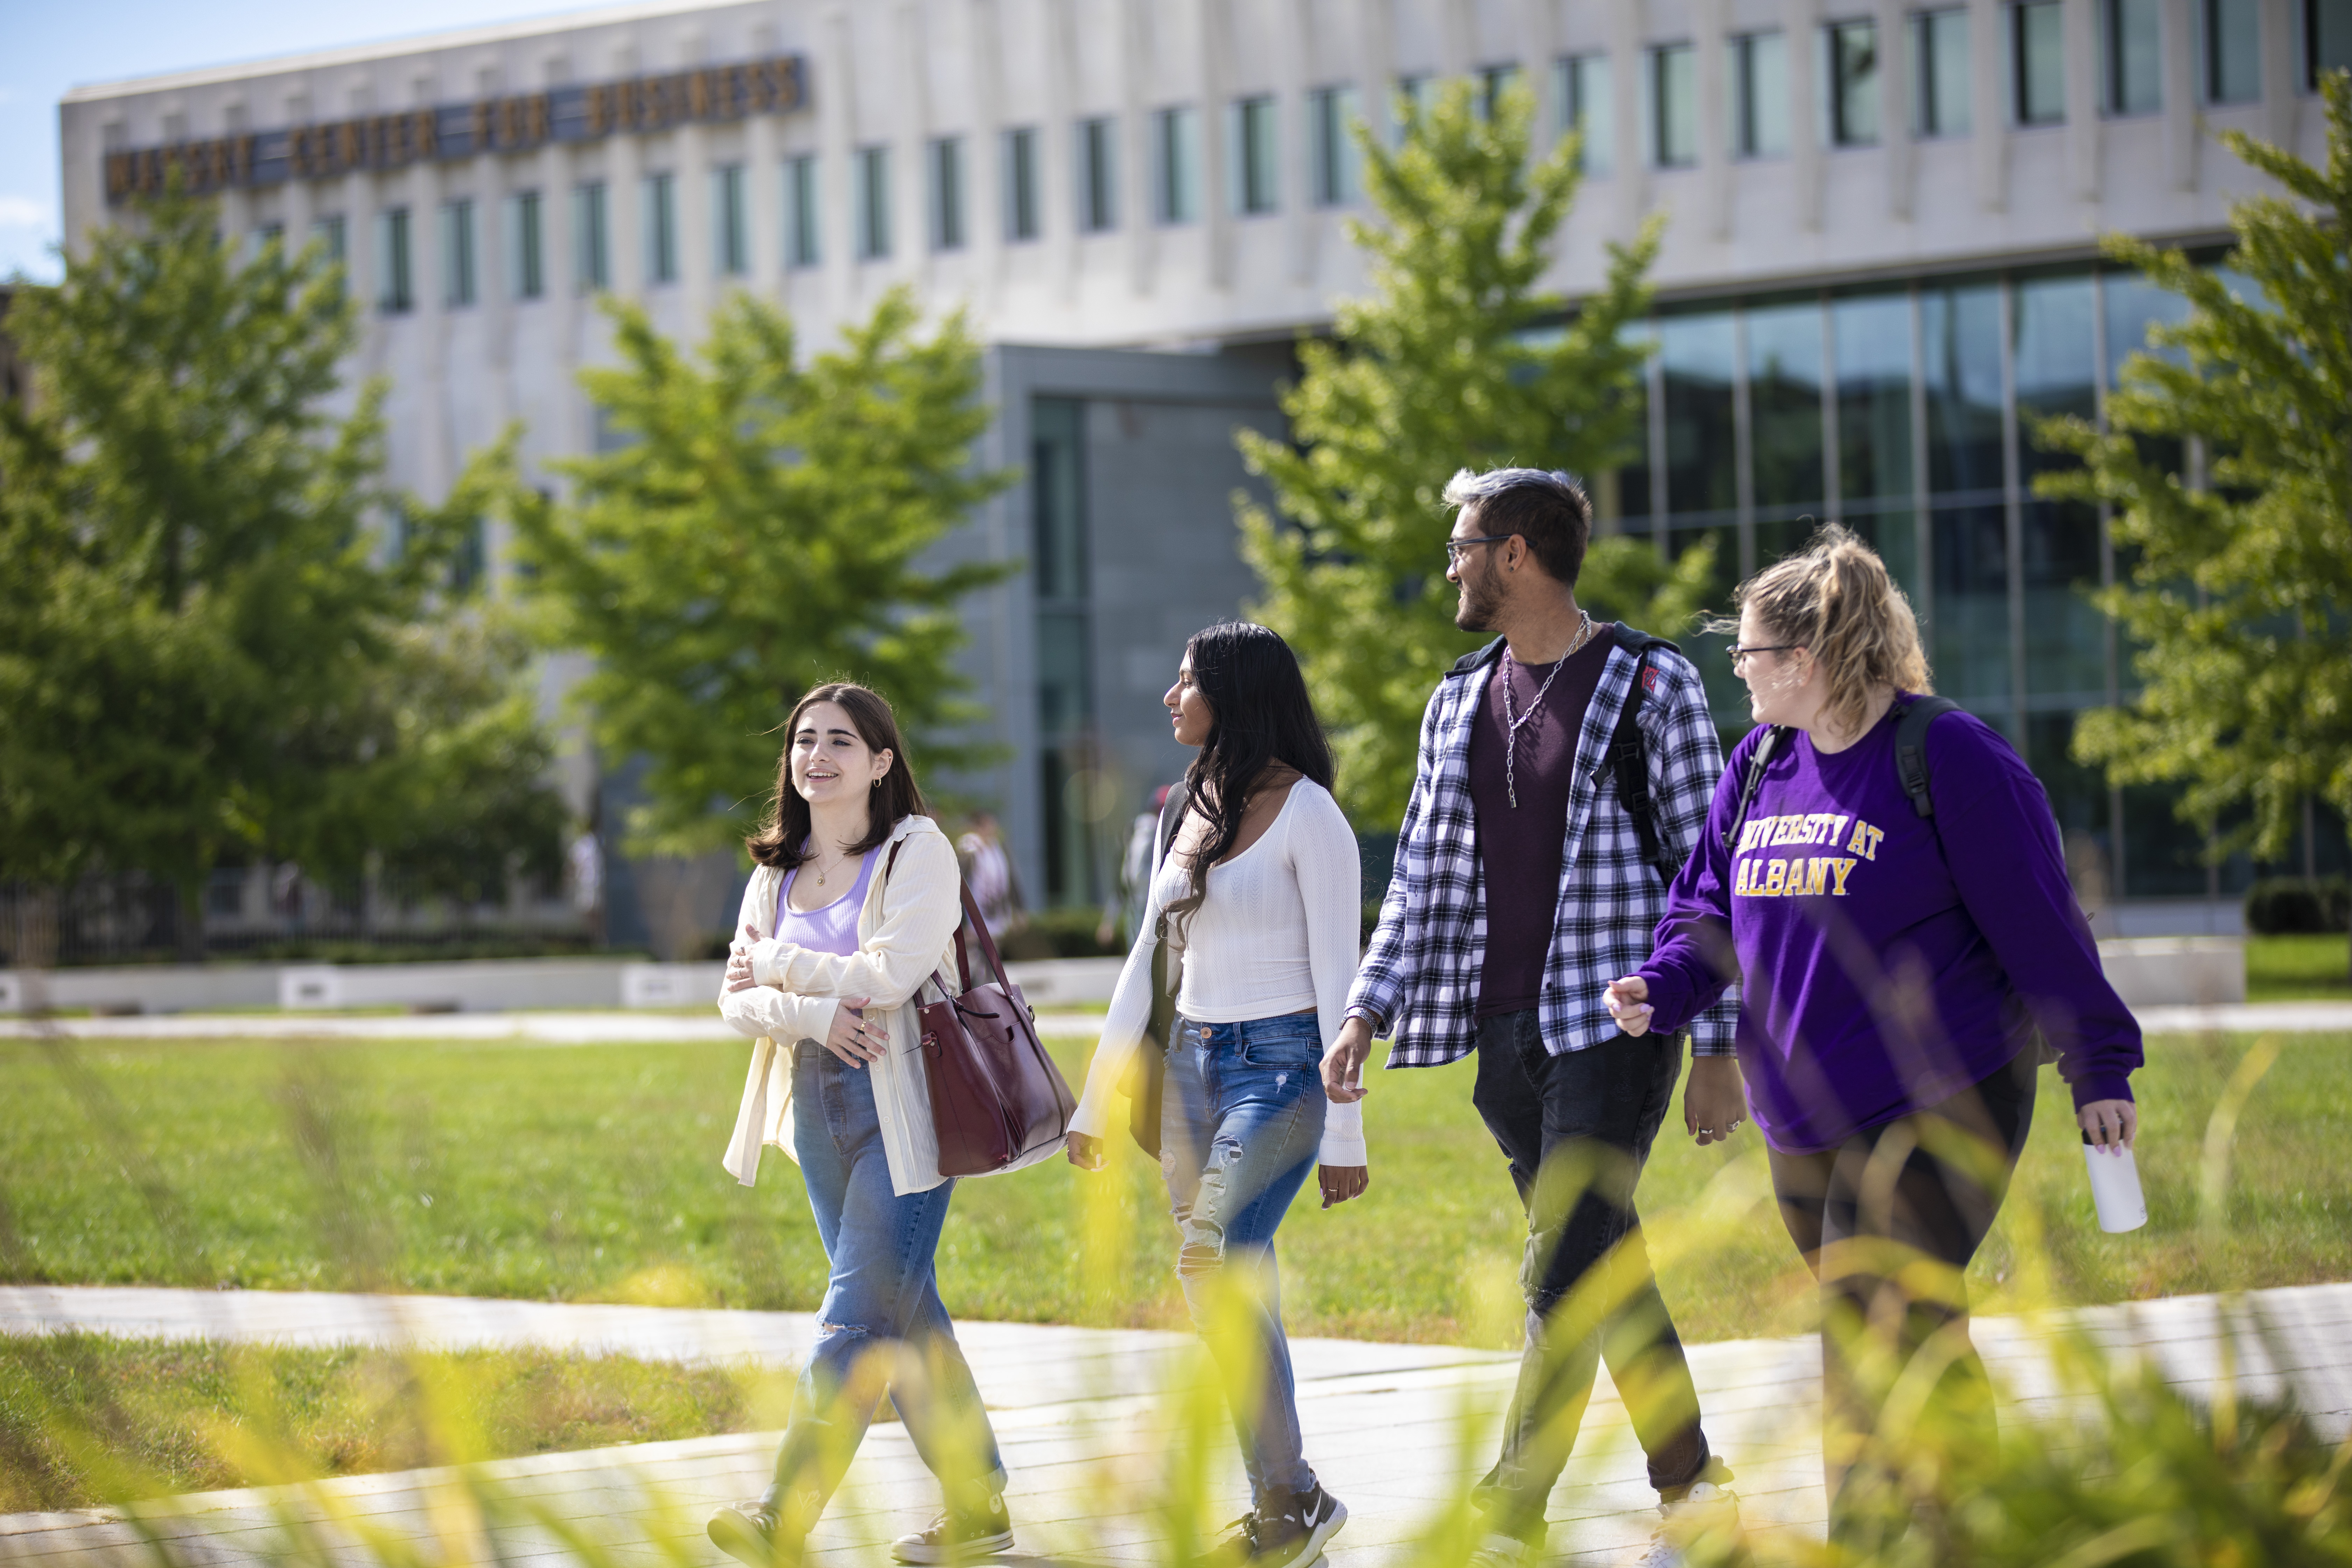 UAlbany students walk in a group around campus on a beautiful sunny day